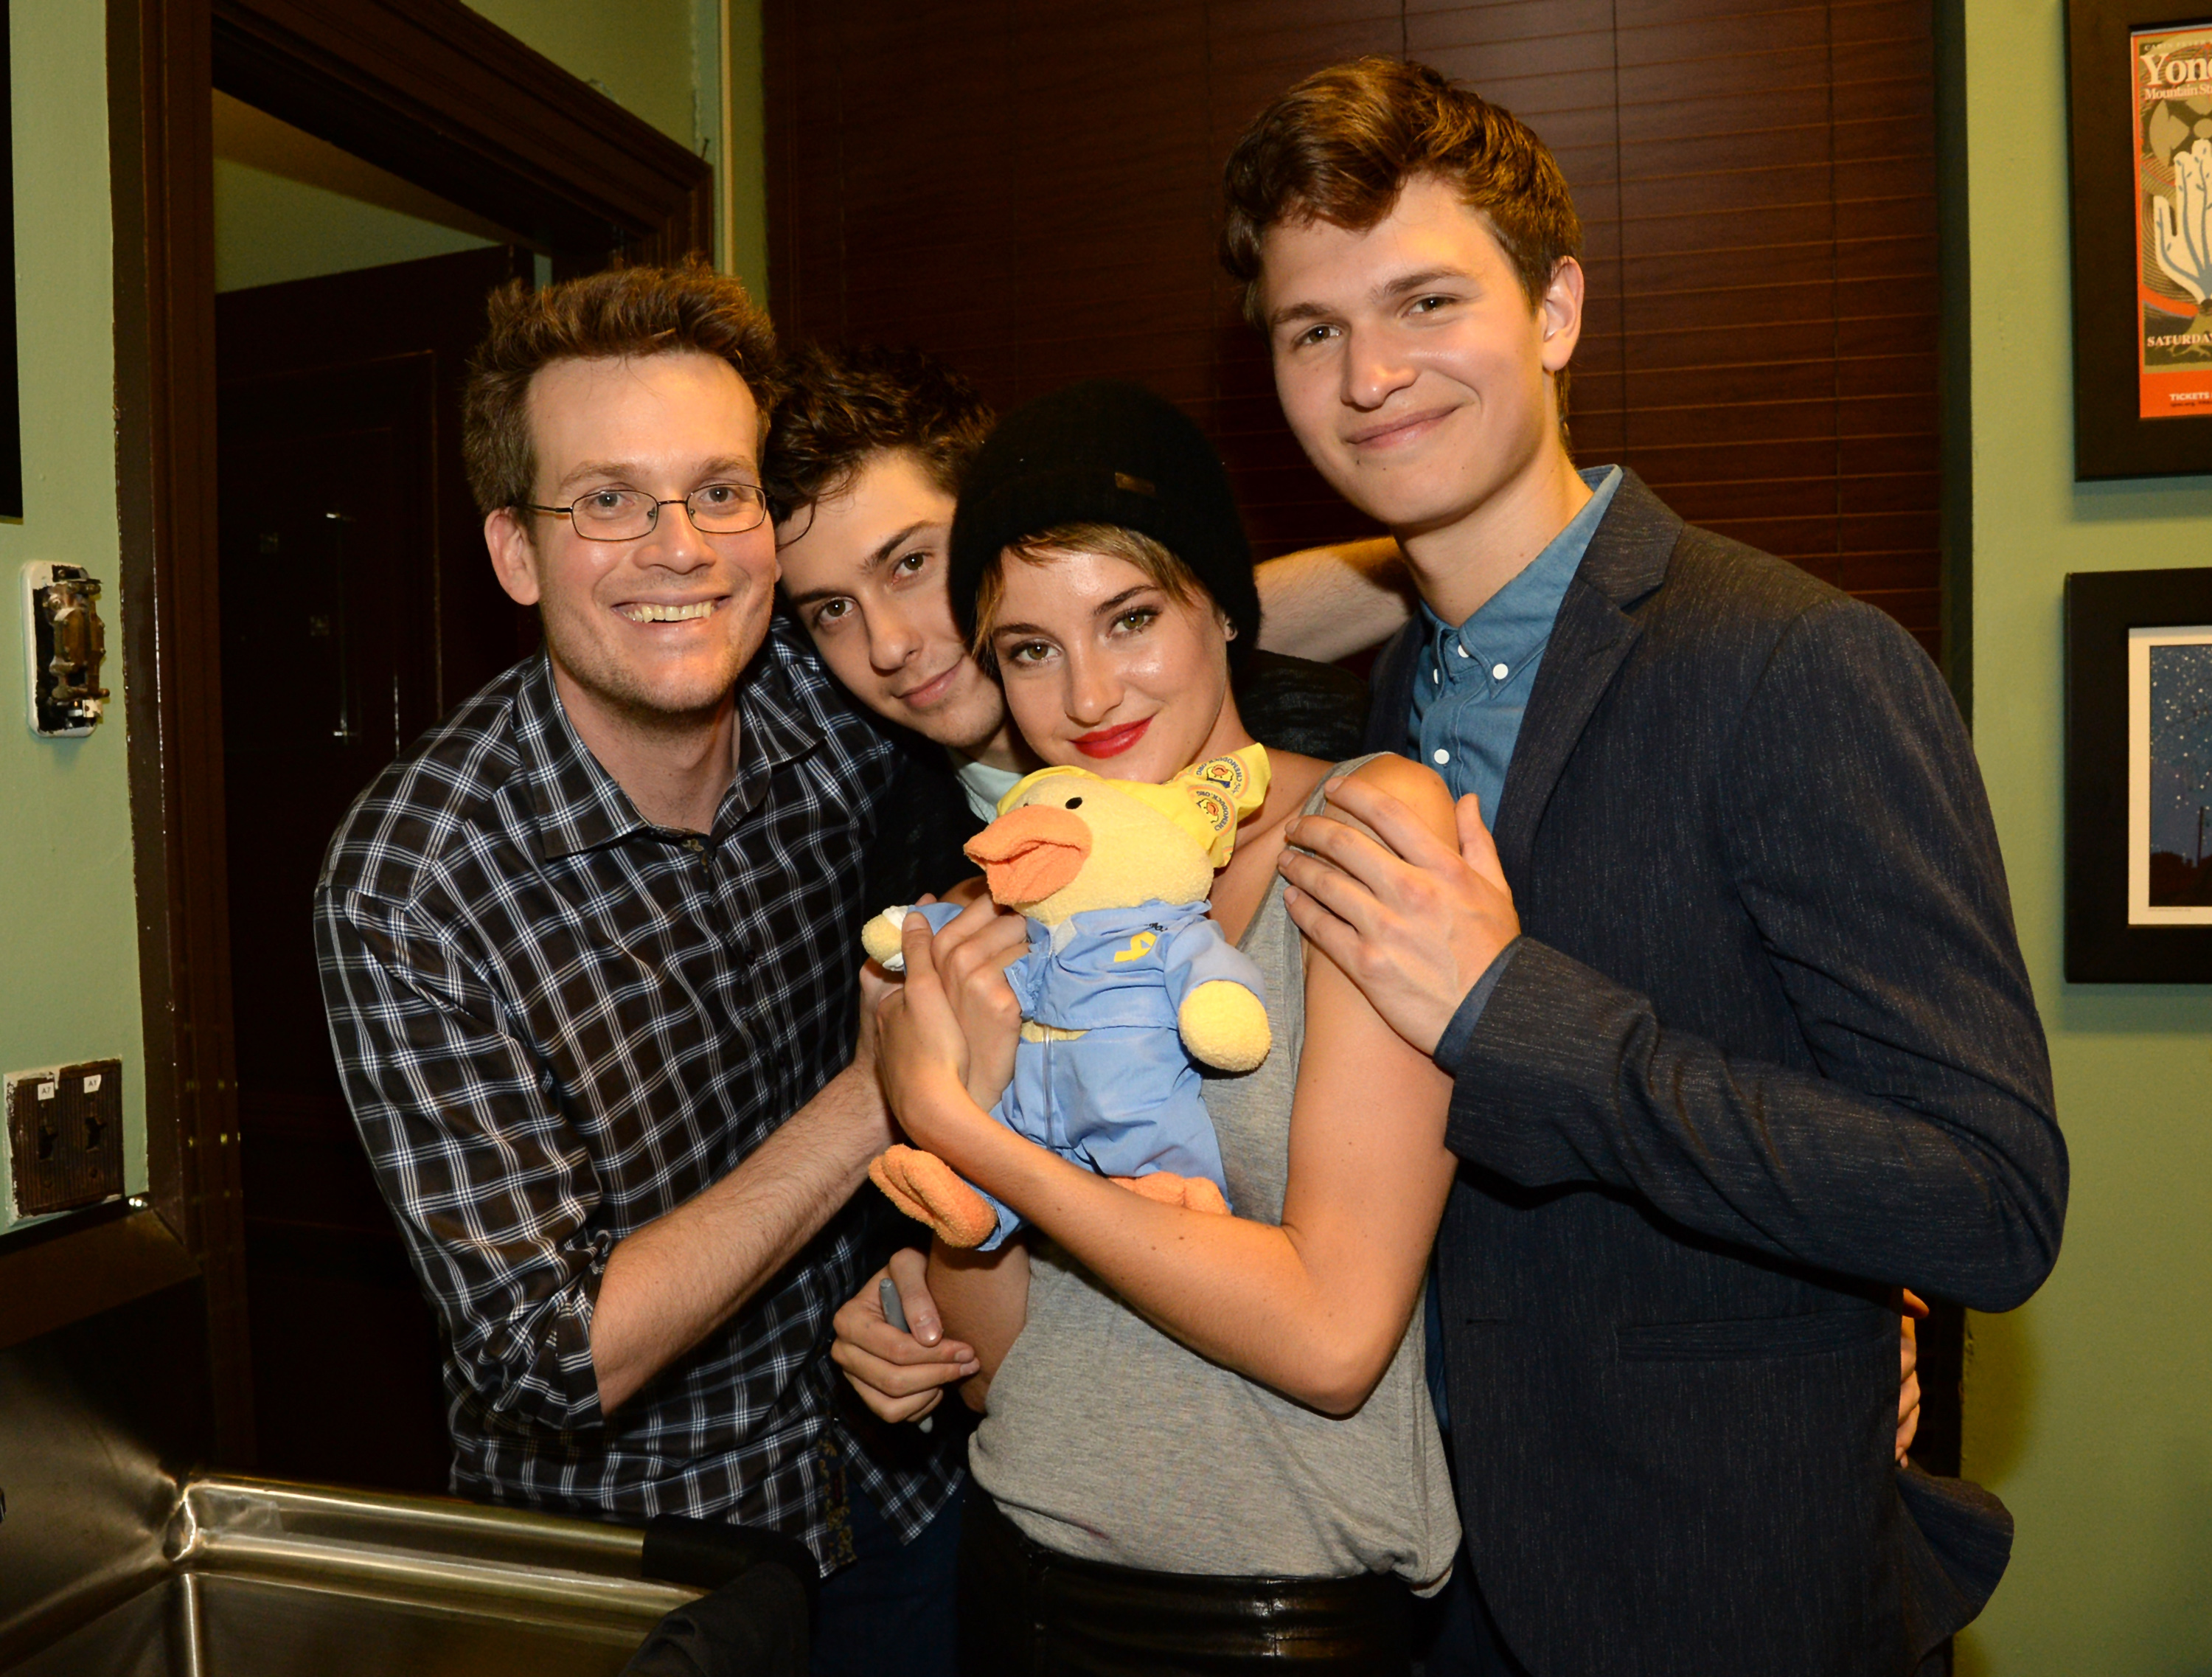 John Green, Nat Wolff, Shailene Woodley, and Ansel Elgort attend "The Fault In Our Stars" Nashville red carpet and fan event with Shailene Woodley, Ansel Elgort, Nat Wolff and John Green at Nashville War Memorial Auditorium on May 8, 2014 in Nashville, Tennessee. (Rick Diamond—Getty Images)